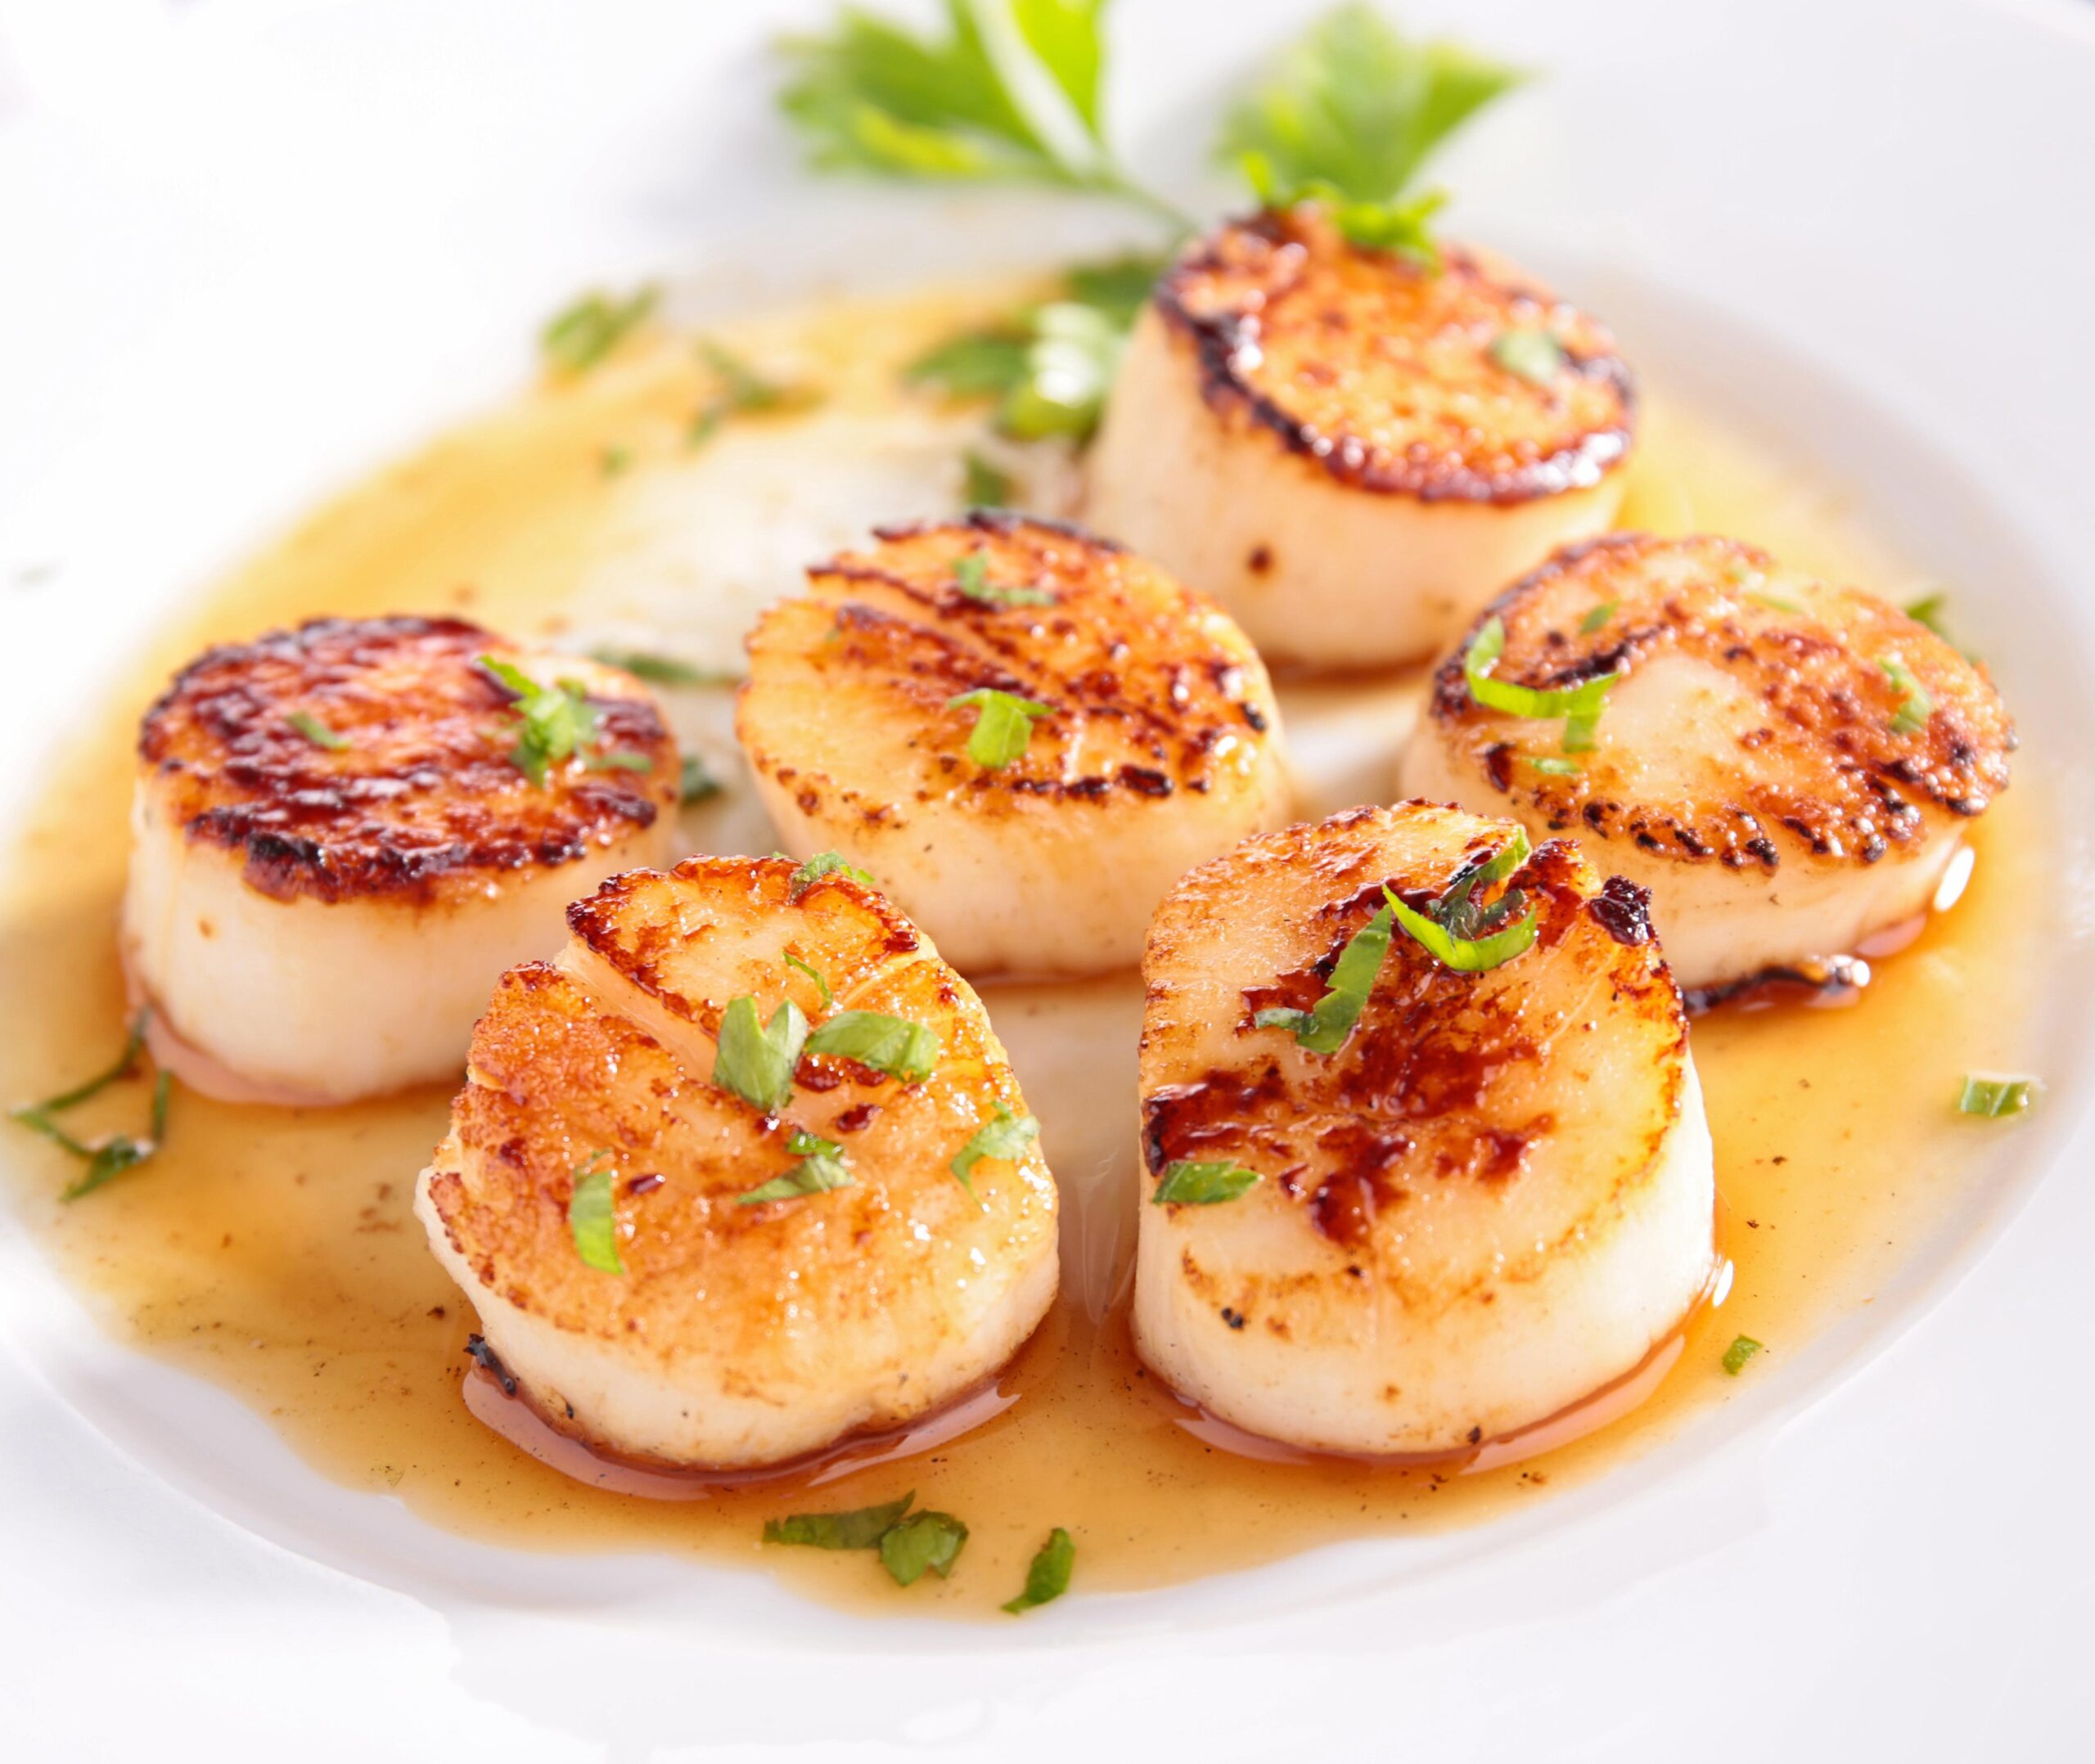  Just the thought of these tender scallops in a savory wine sauce could make your stomach grumble.